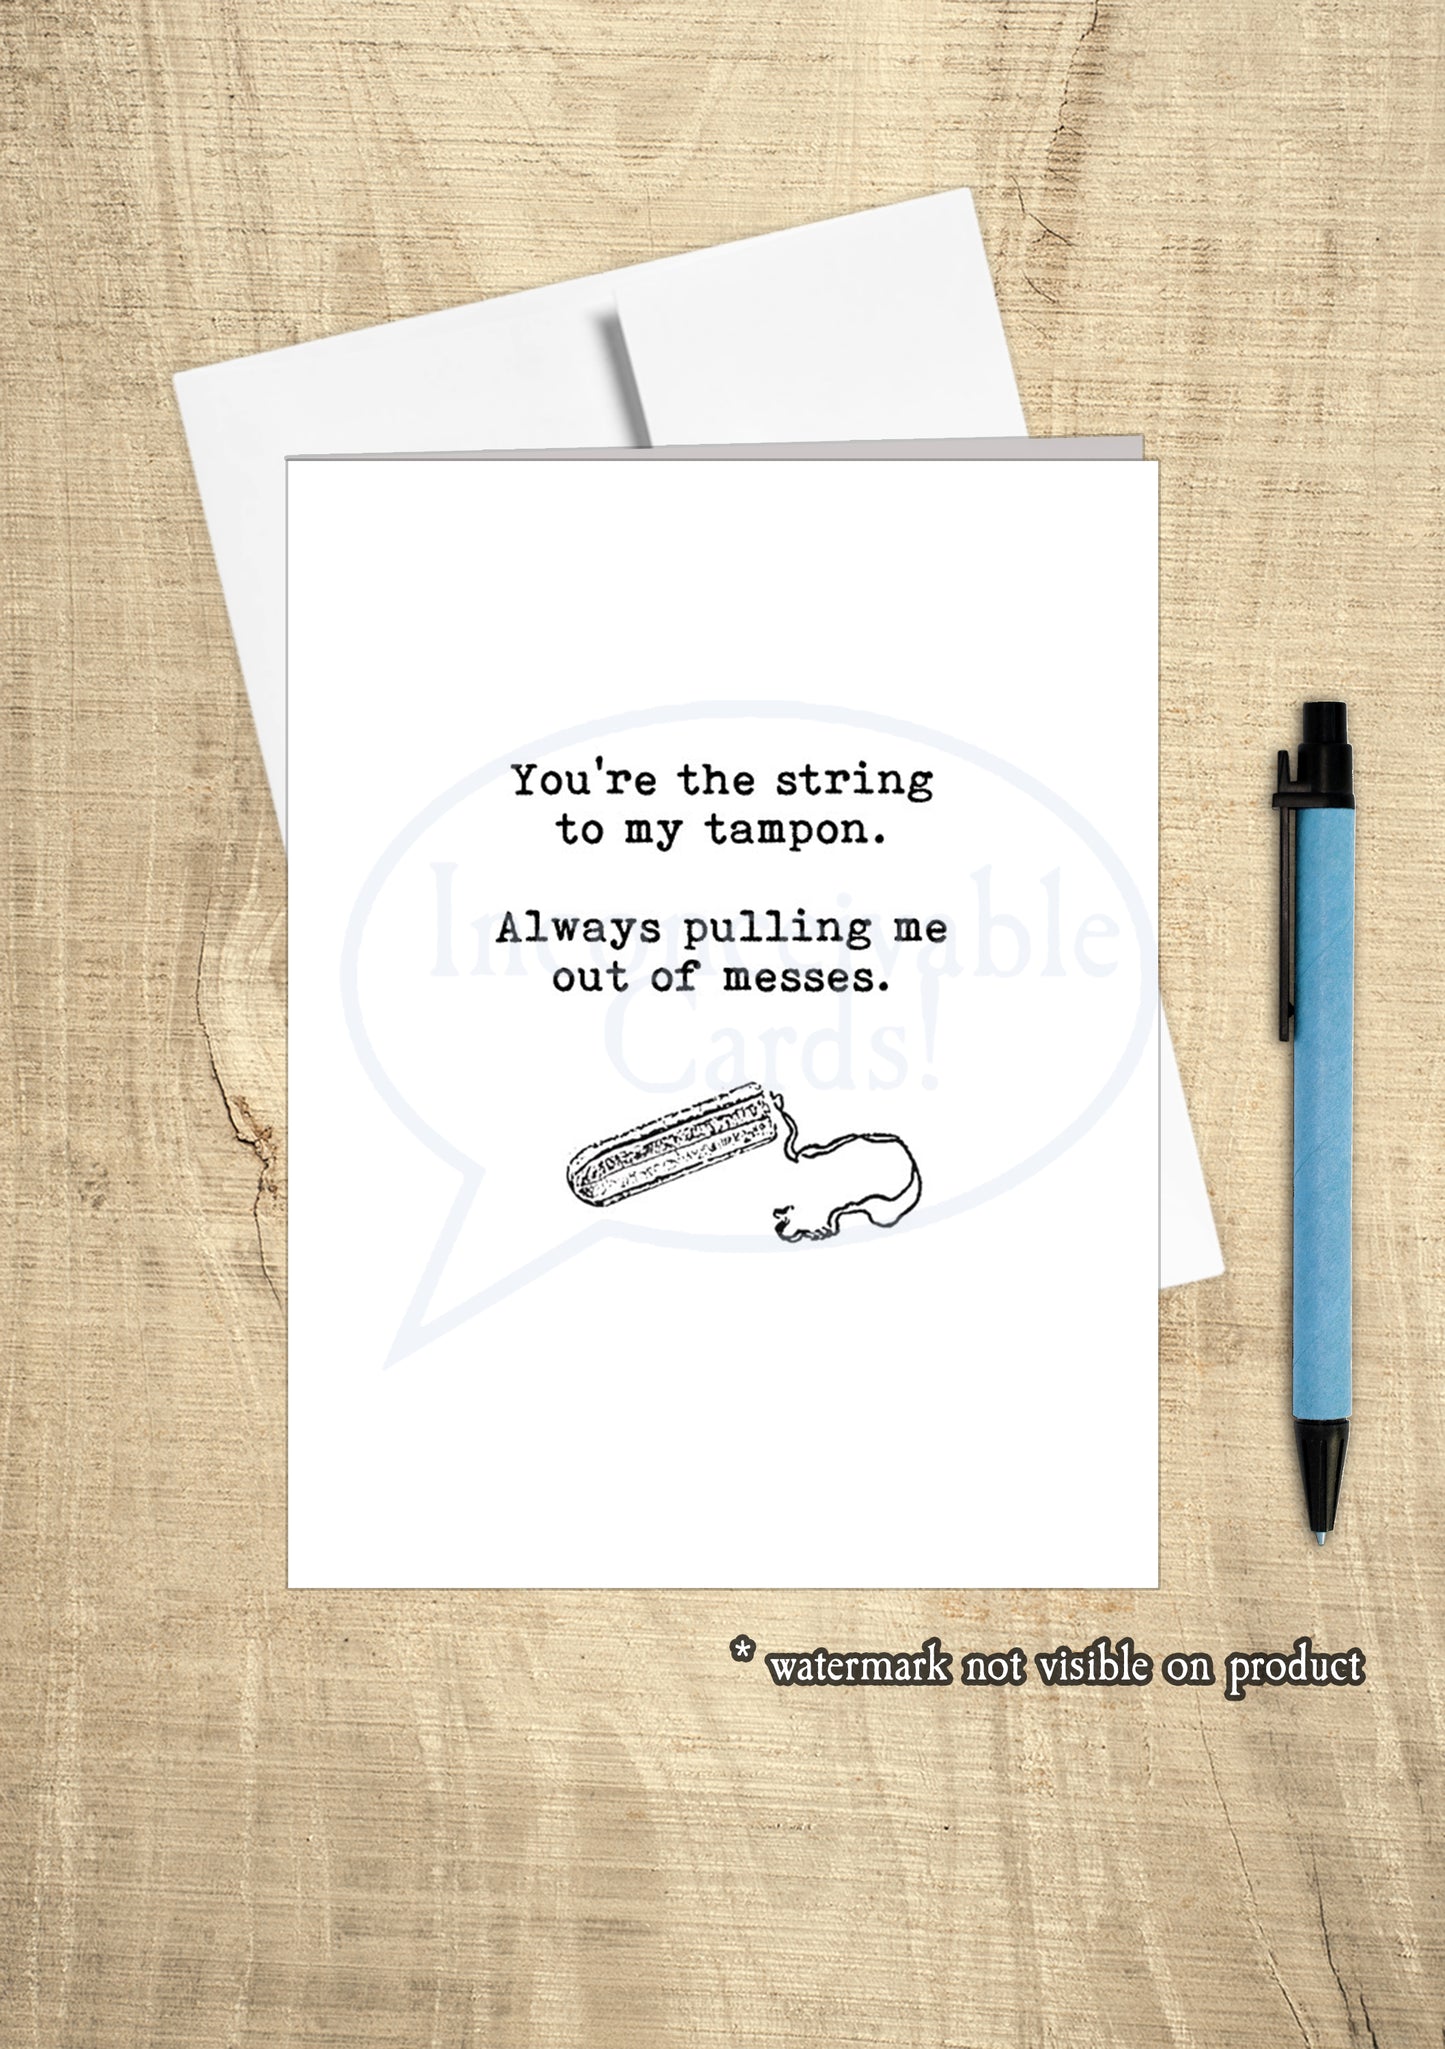 "You're the String to my Tampon" Funny Card, Happy Birthday, Anniversary, Thinking of You, Just Because Card